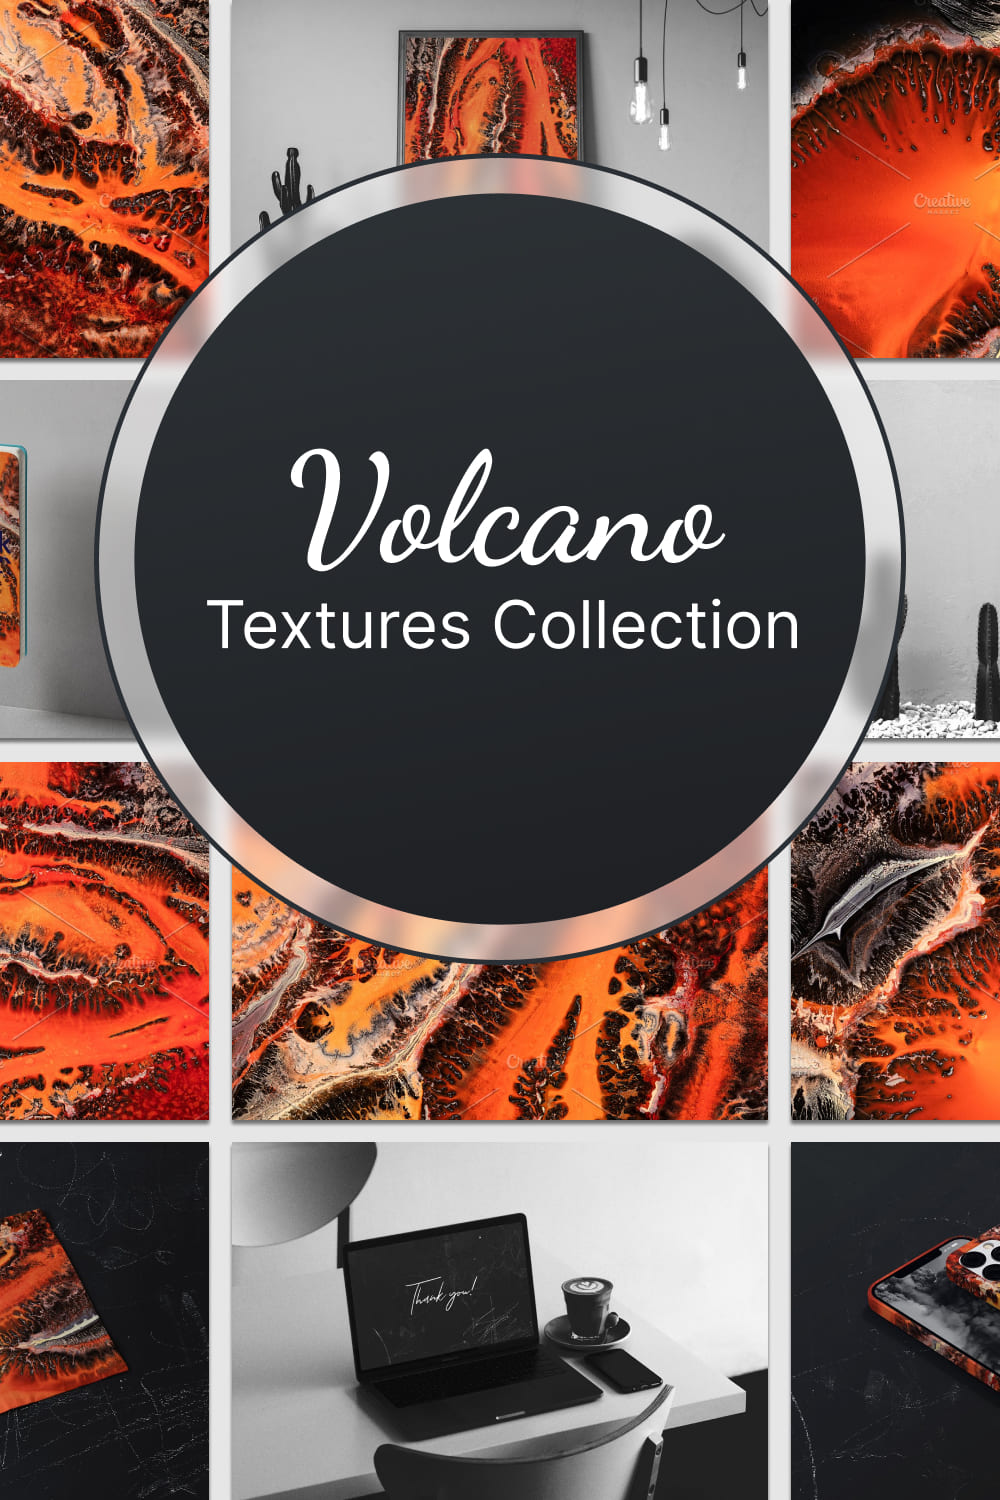 Volcano textures collection - pinterest image preview.